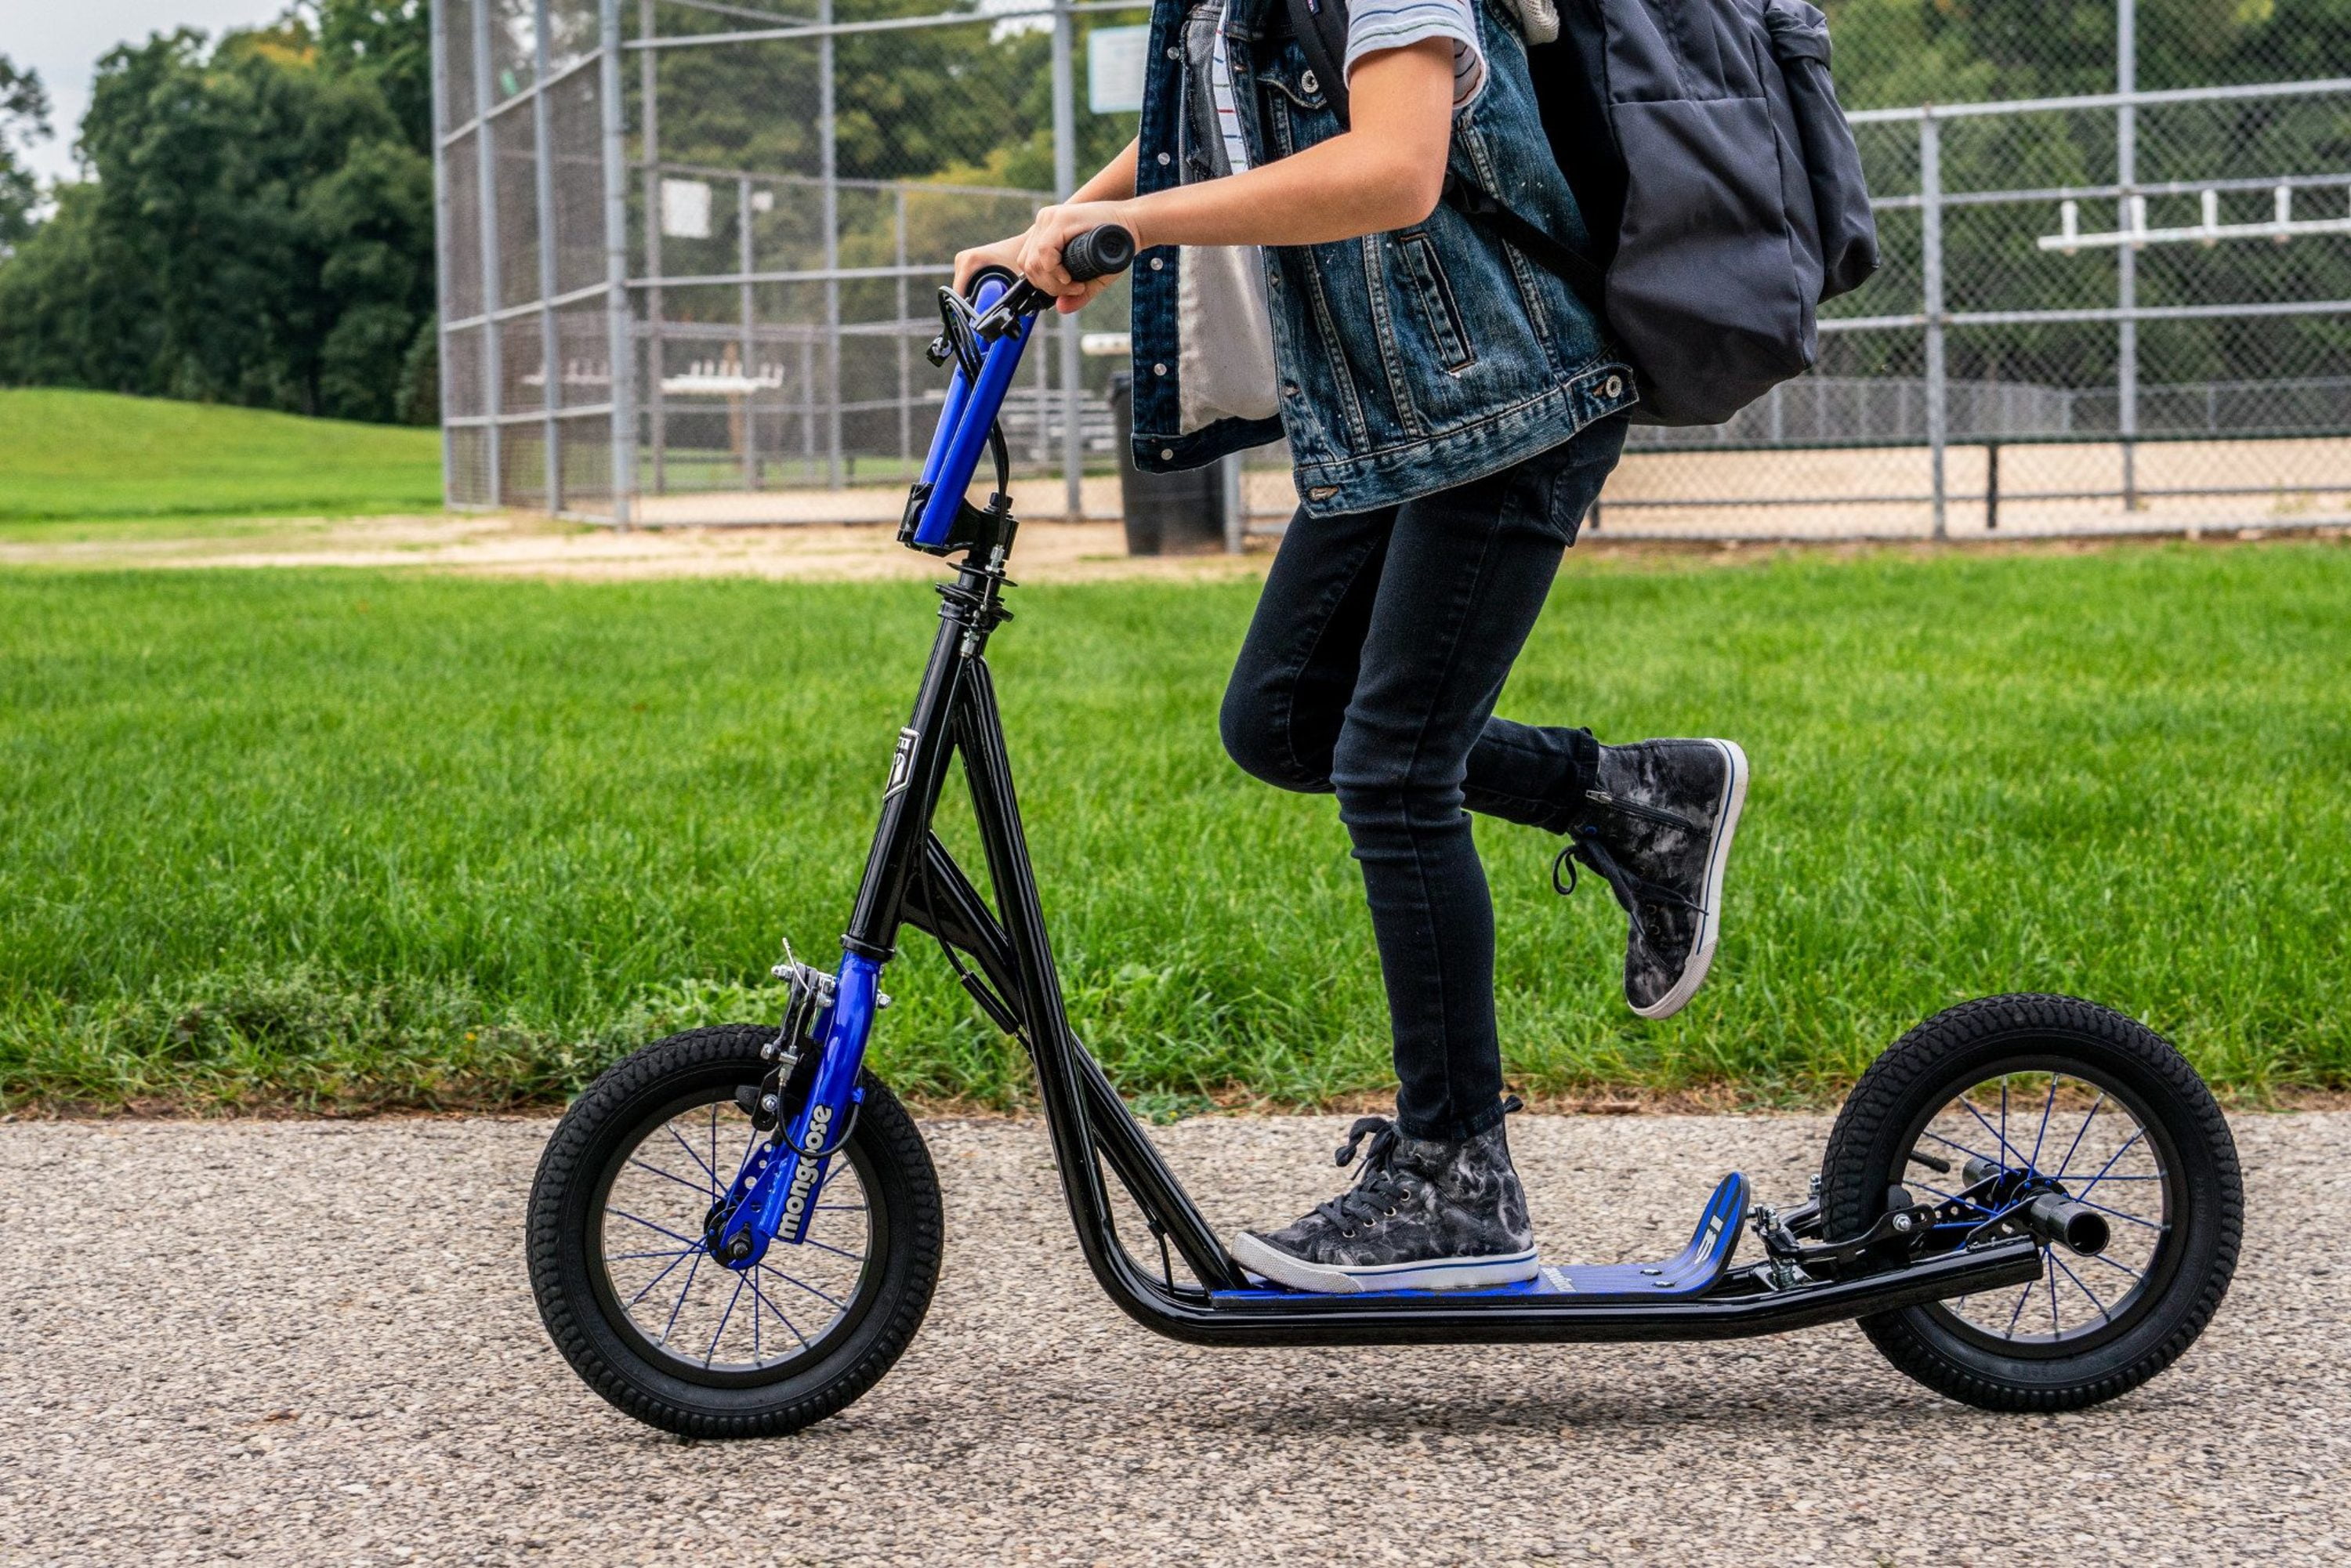 12 inch kick scooter